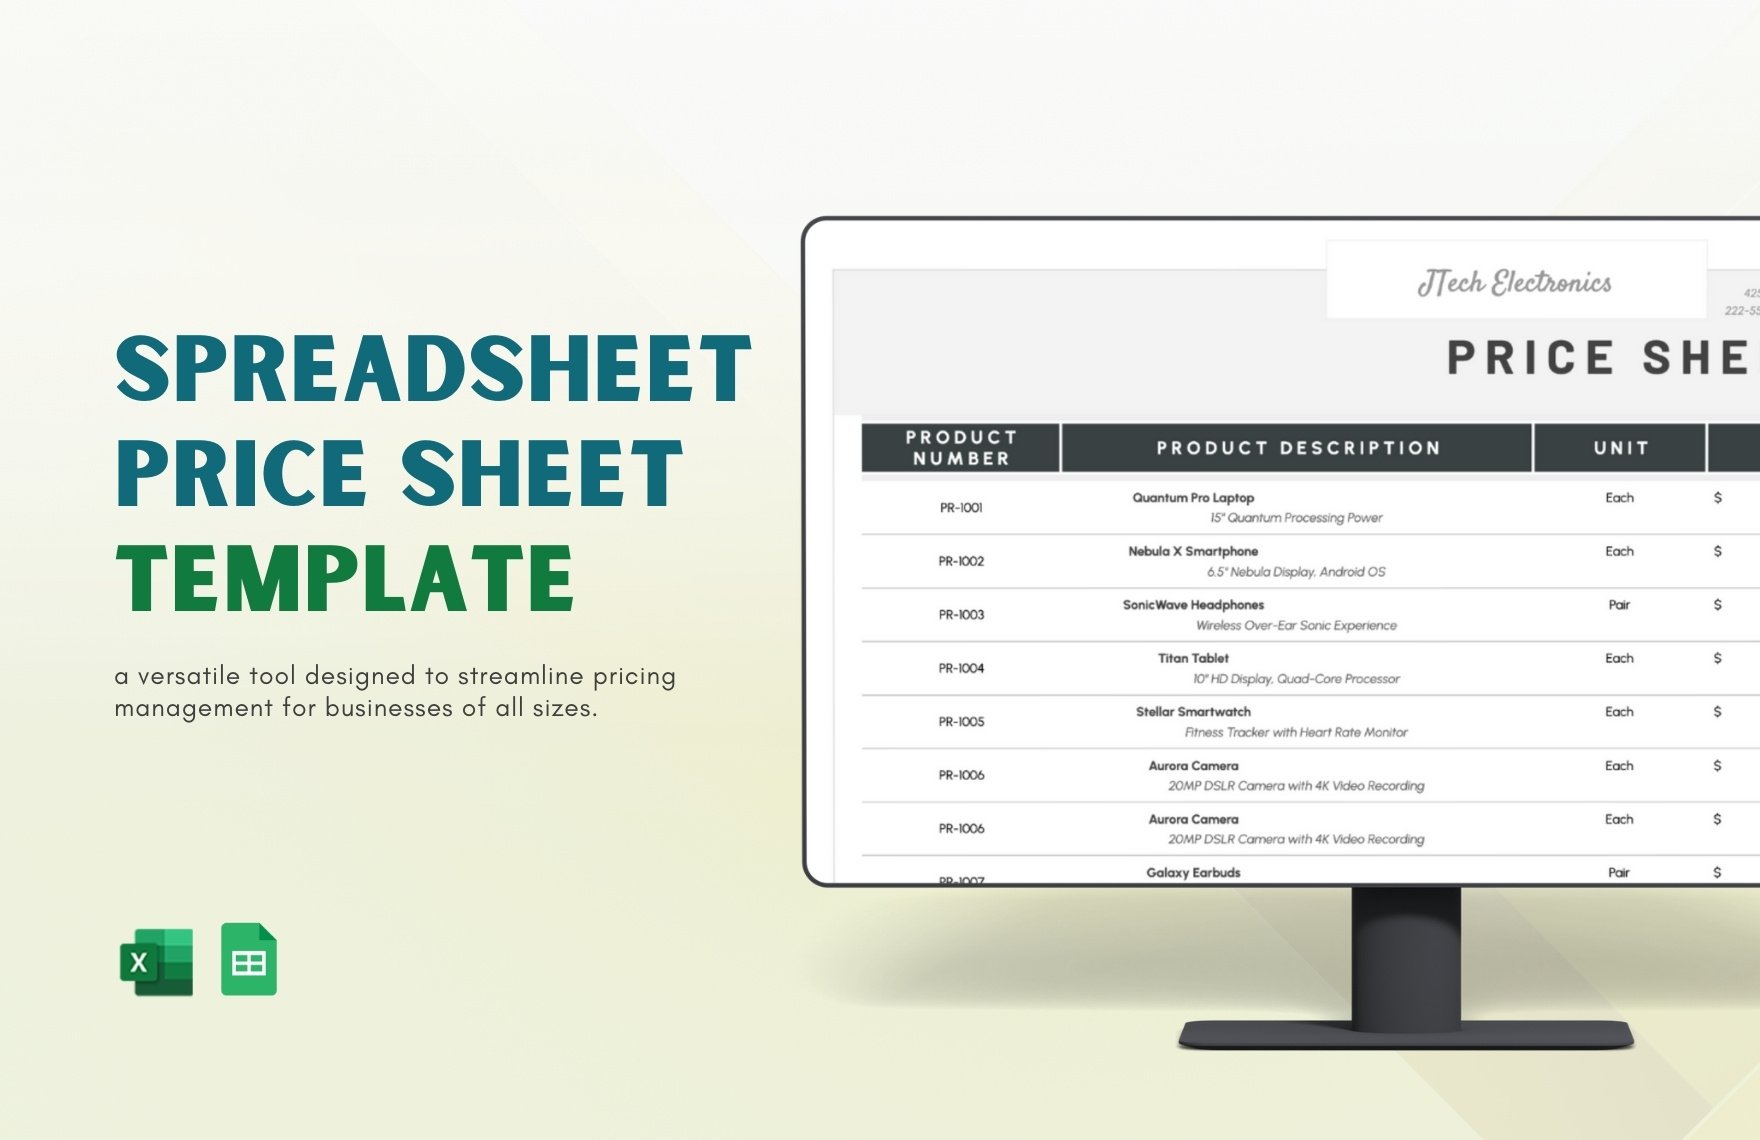 Spreadsheet Price Sheet Template in Excel, Google Sheets